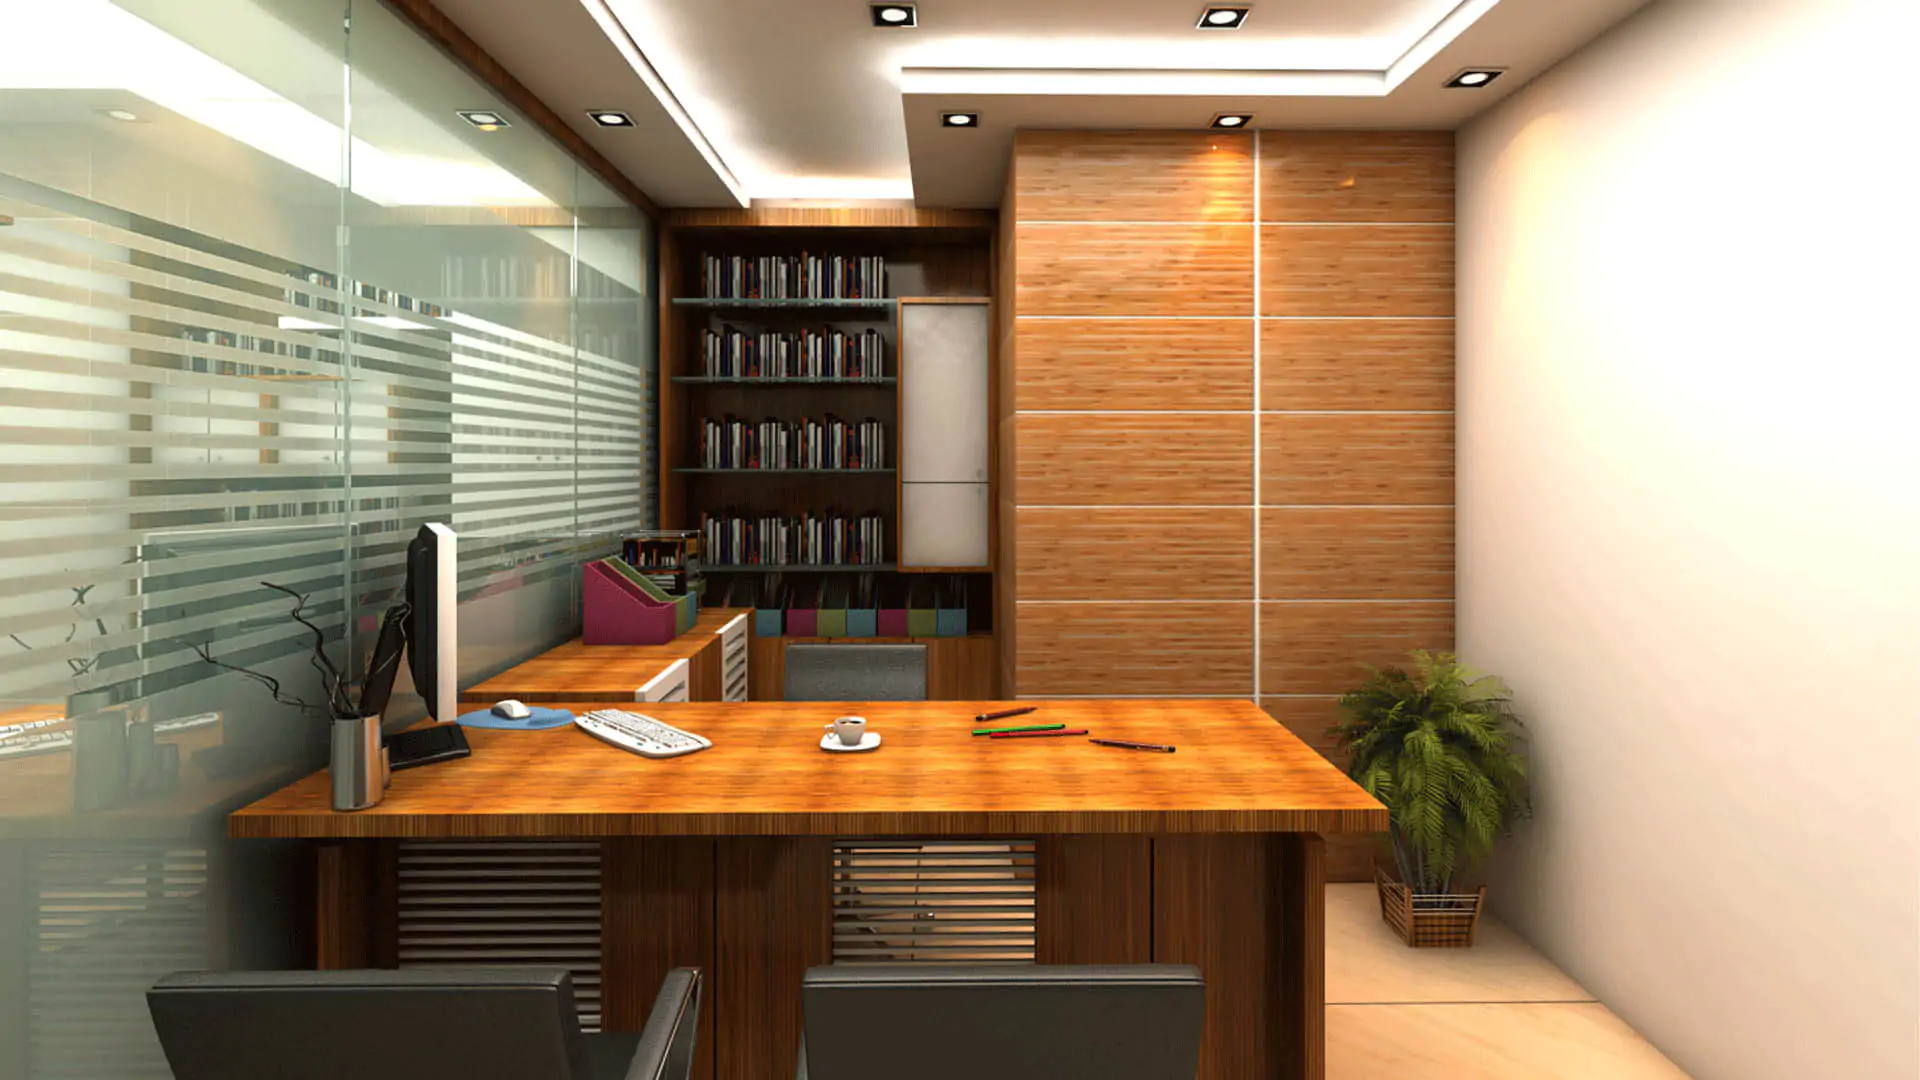 Manager Victorian Room Interior Design Agency In Dhaka